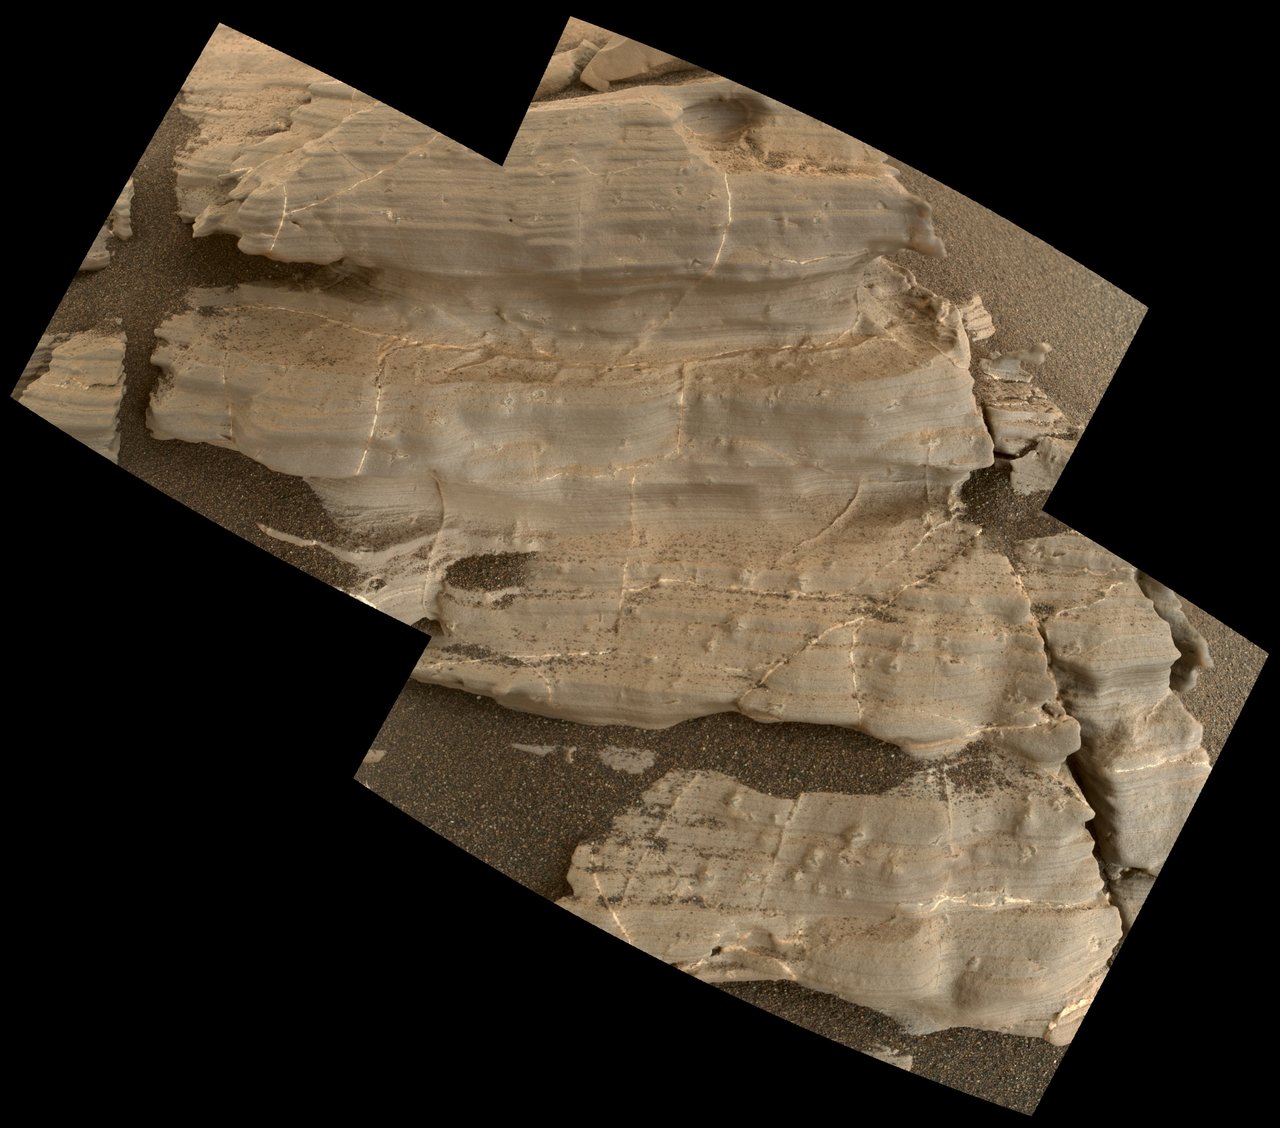 This exposure of finely laminated bedrock on Mars includes tiny crystal-shaped bumps, plus mineral veins with both bright and dark material. This rock target, called "Jura," was imaged by the MAHLI camera on NASA's Curiosity Mars rover on Jan. 4, 2018, during Sol 1925 of the mission. Credits: NASA/JPL-Caltech/MSSS

Full image and caption